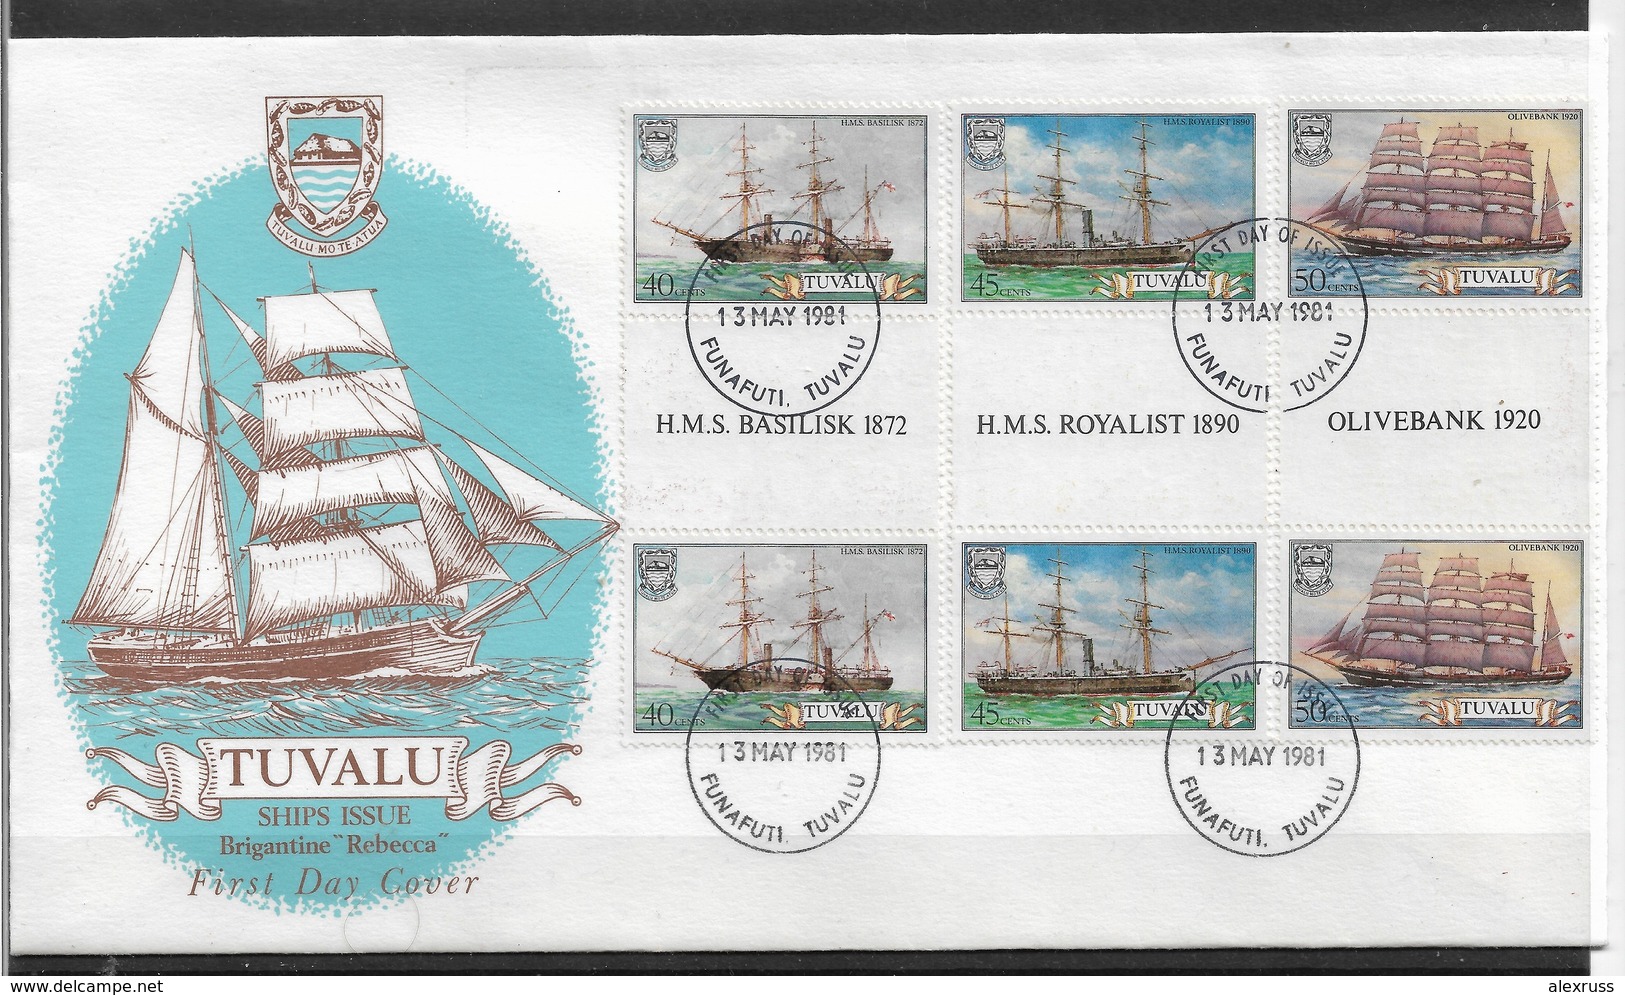 TUVALU 1981 FINE Cachet FDC Gutter Pairs Stamps,, Sailing Ships, Ships,VF-XF !! (RN-50) - Tuvalu